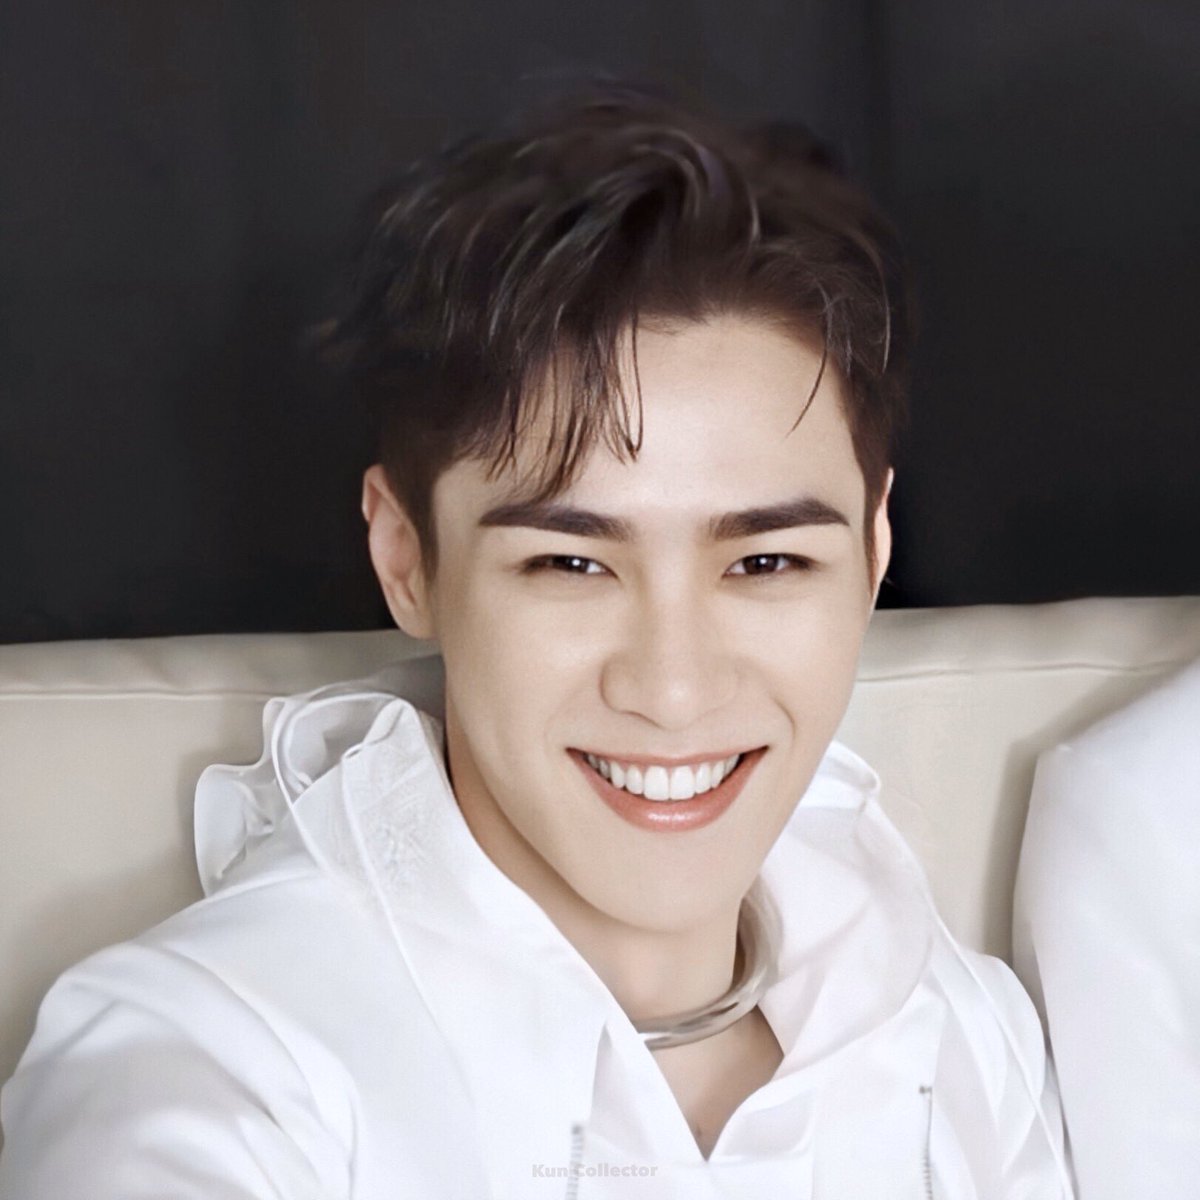 Kun’s smile hits with the force of ten million suns.